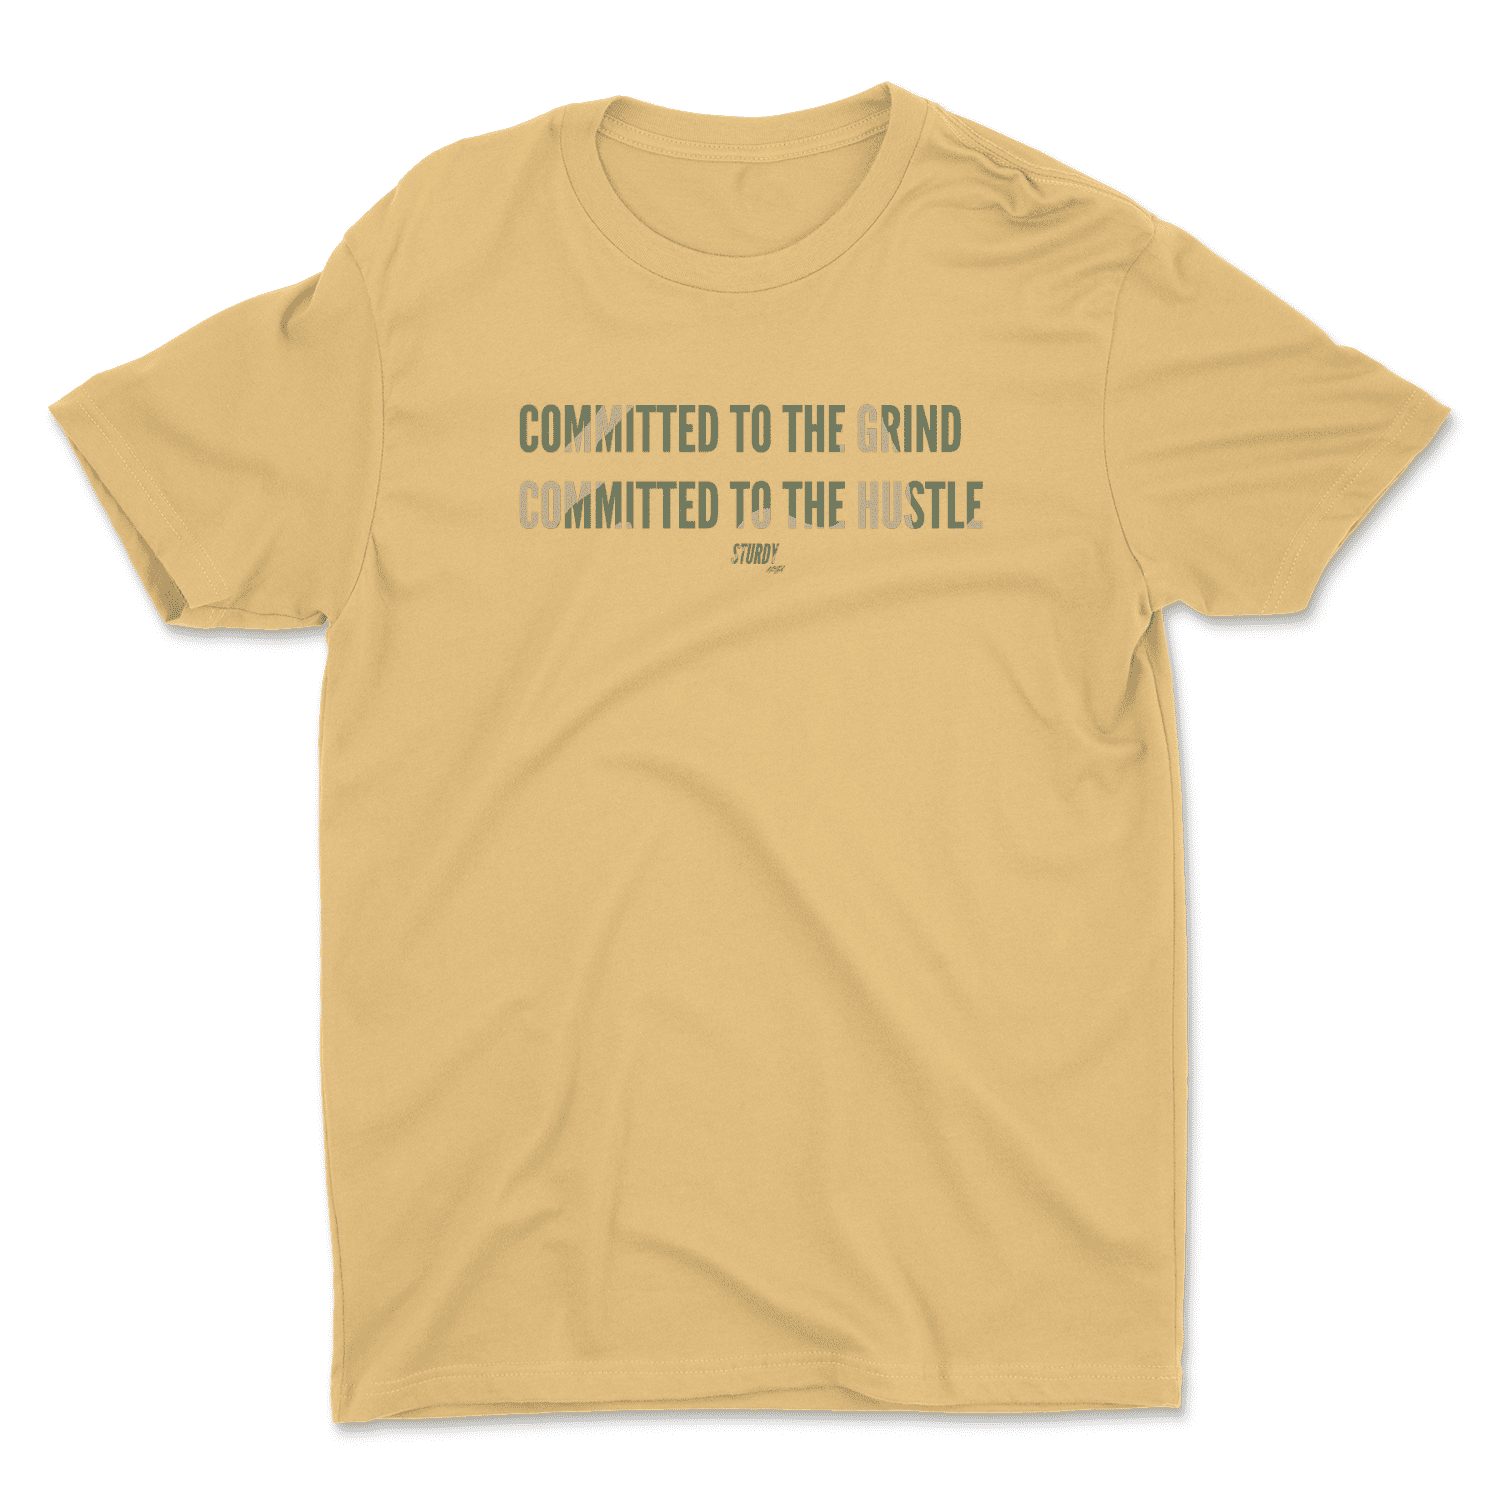 A beige t-shirt with a phrase printed in dark lettering across the chest area, with a staggered, split-line design.